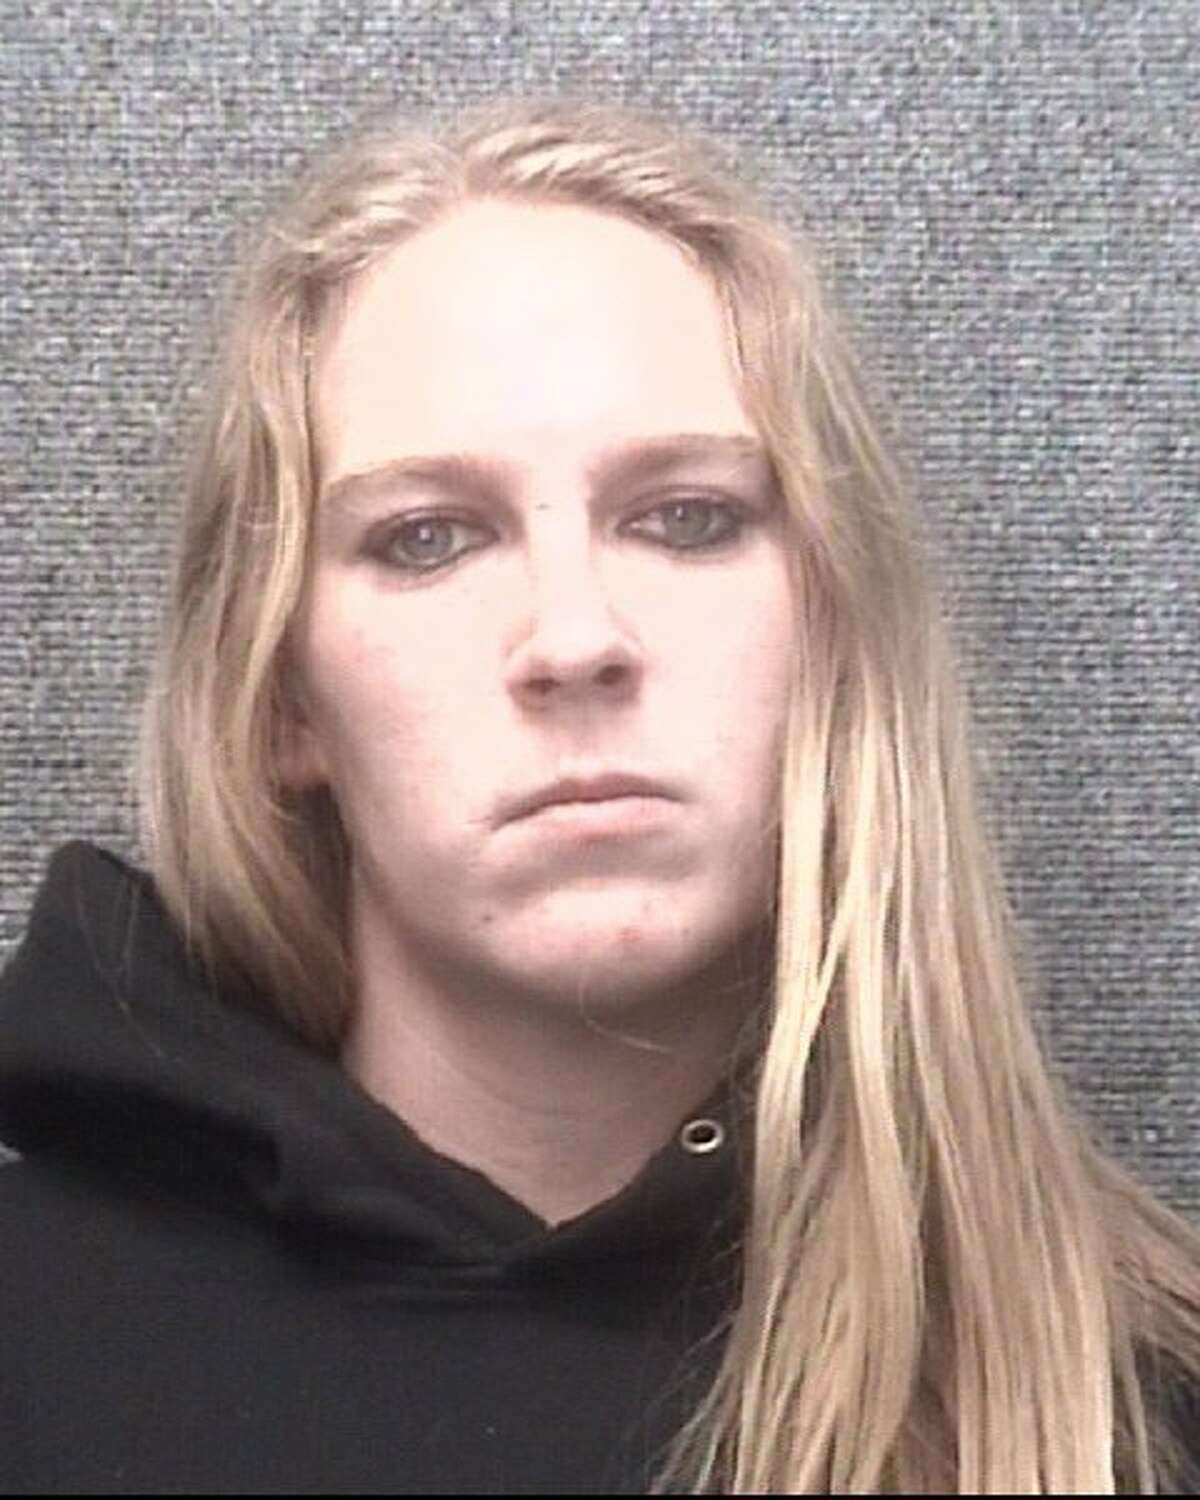 Michelle Renee Rowan, 24, arrested in prostitution ring.   